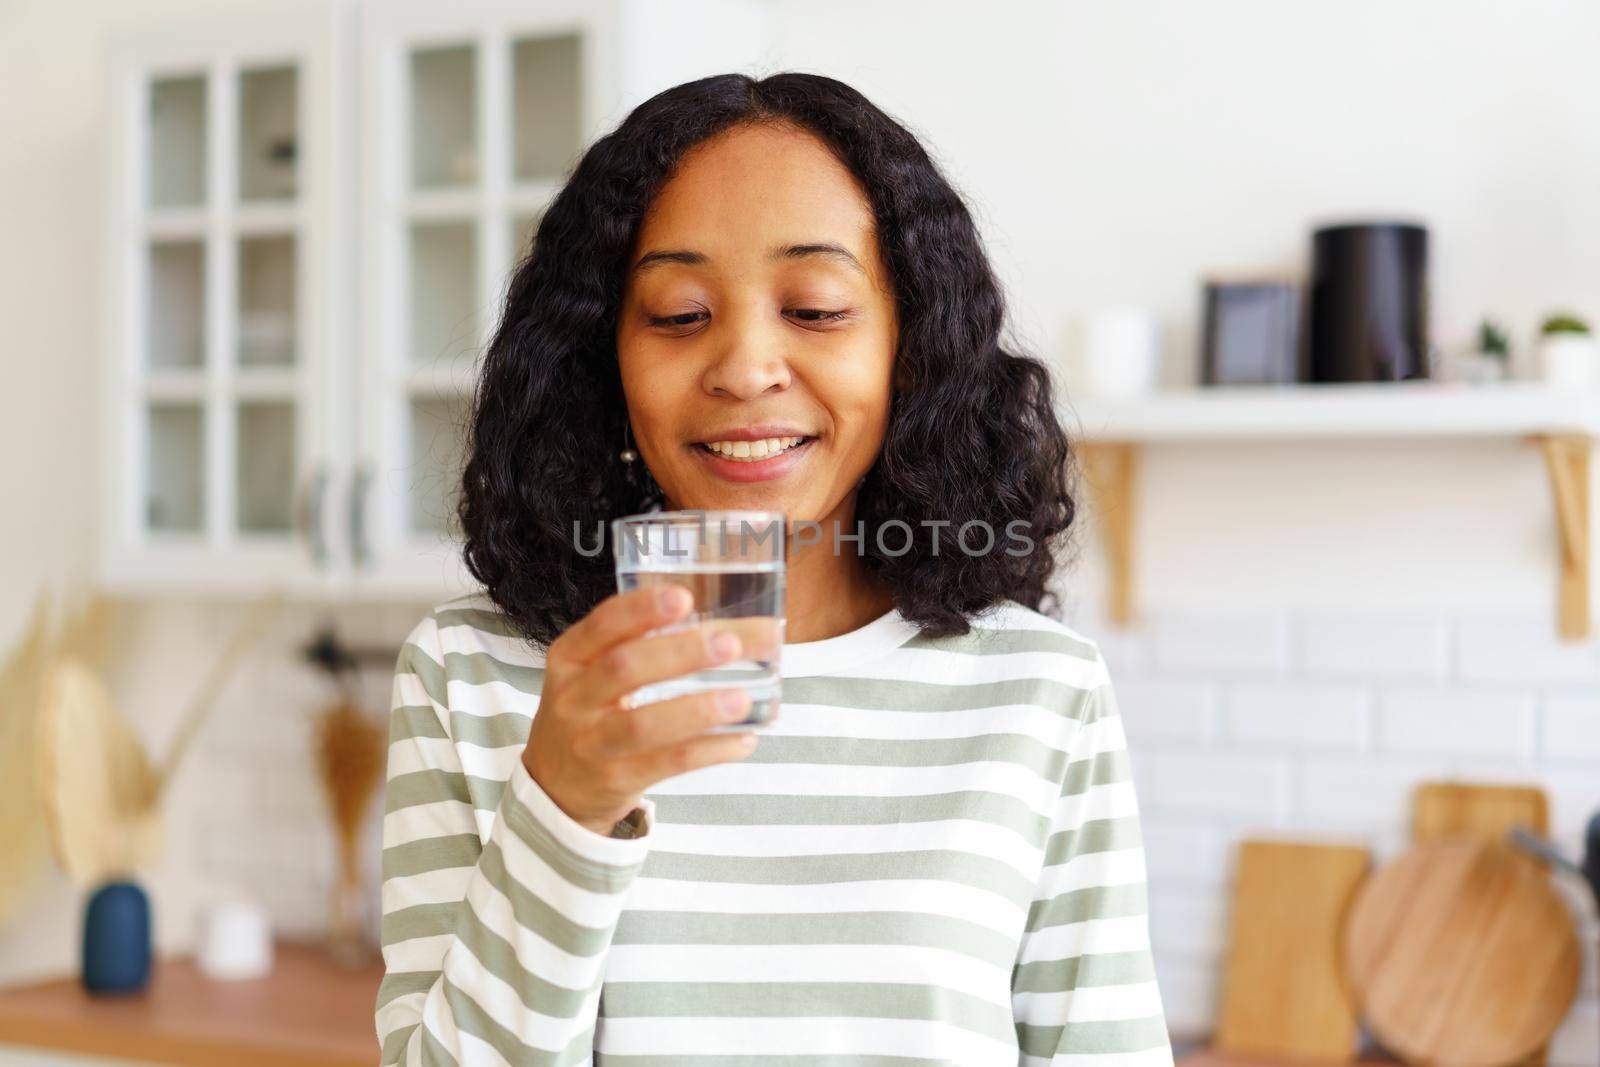 Happy and delightful young African-American woman looking at glass of clear water and ready to take sip in kitchen. Selective focus, soft lighting, horizontal, copy space